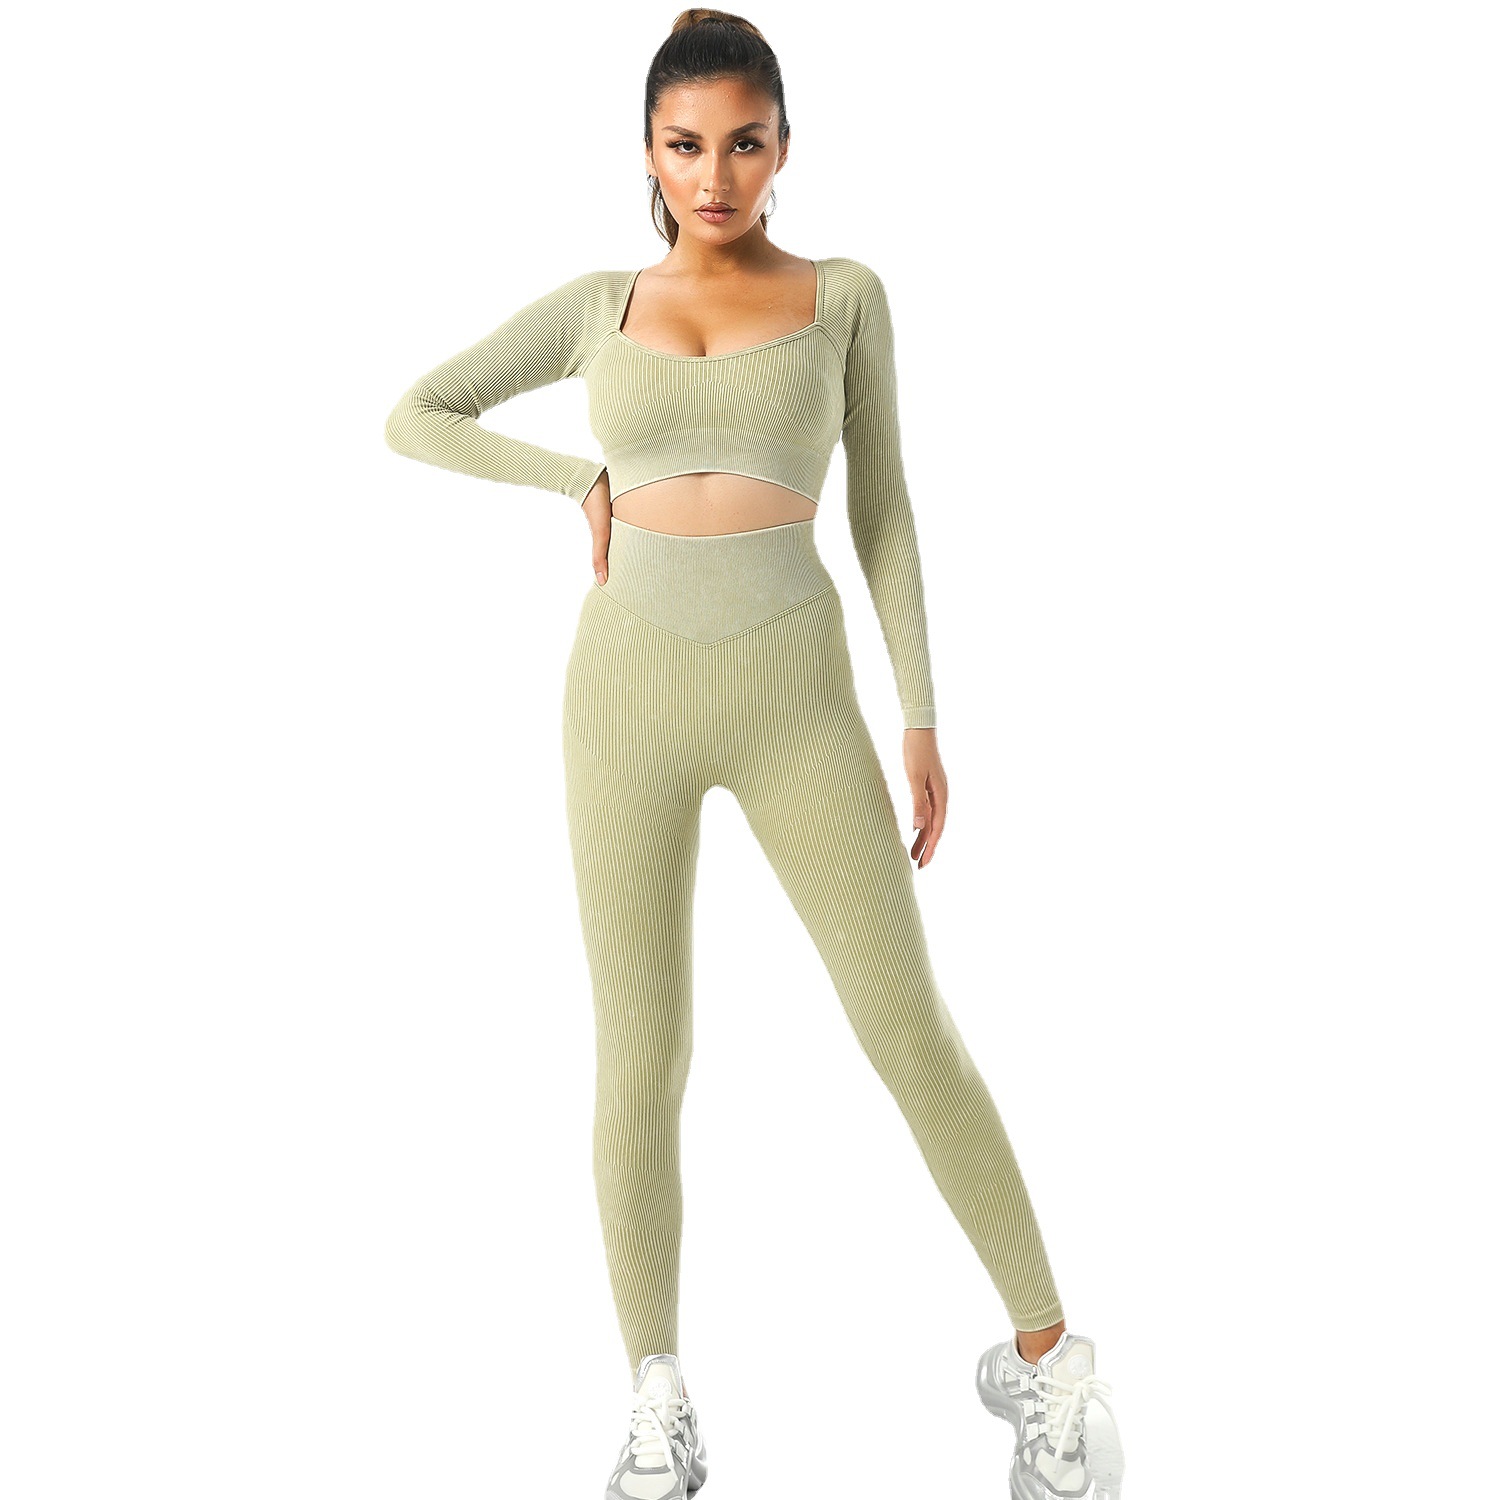 Autumn and Winter Stone Washed Seamless Yoga Suit Running Fitness Clothes Top Yoga Sports Underwear Lulu Yoga Pants Women